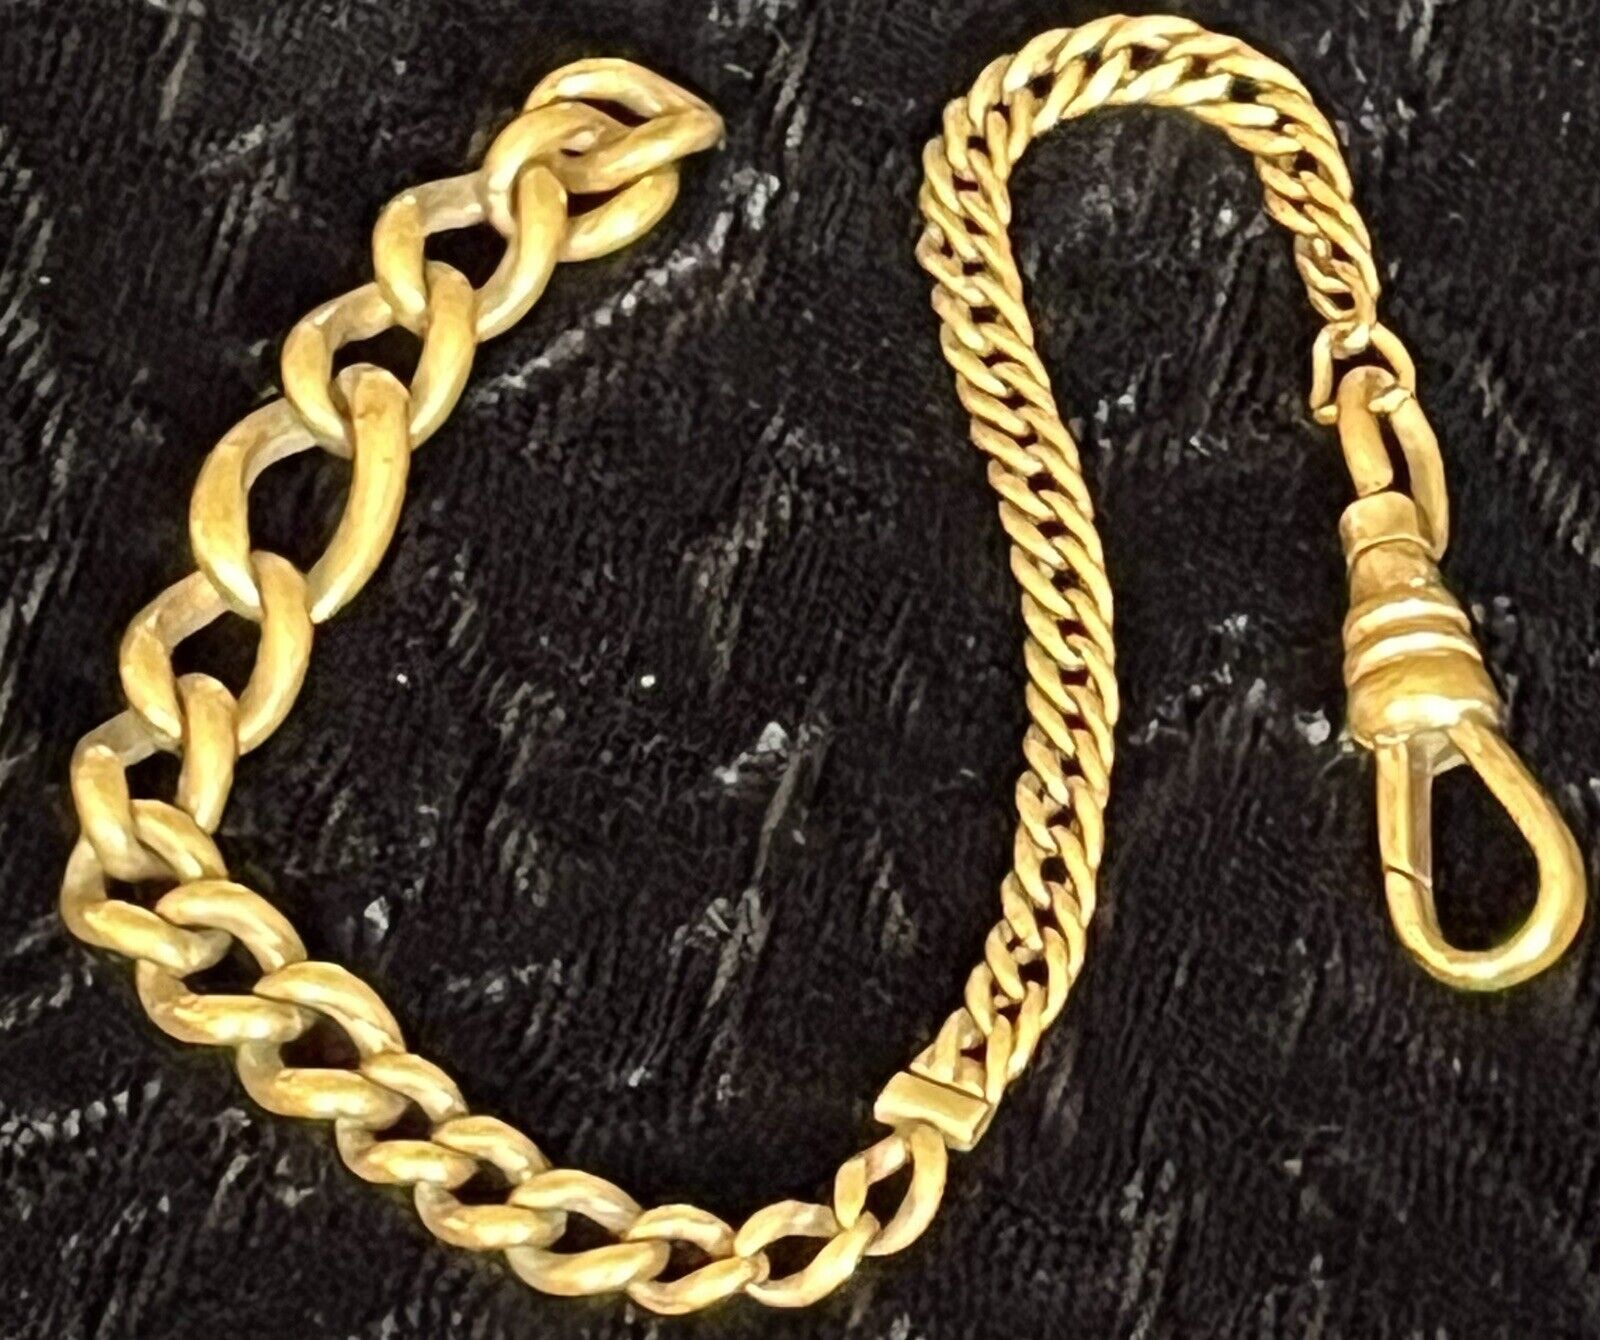 Antique Watch Fob Chain Signed W.J.C. Gold plated?